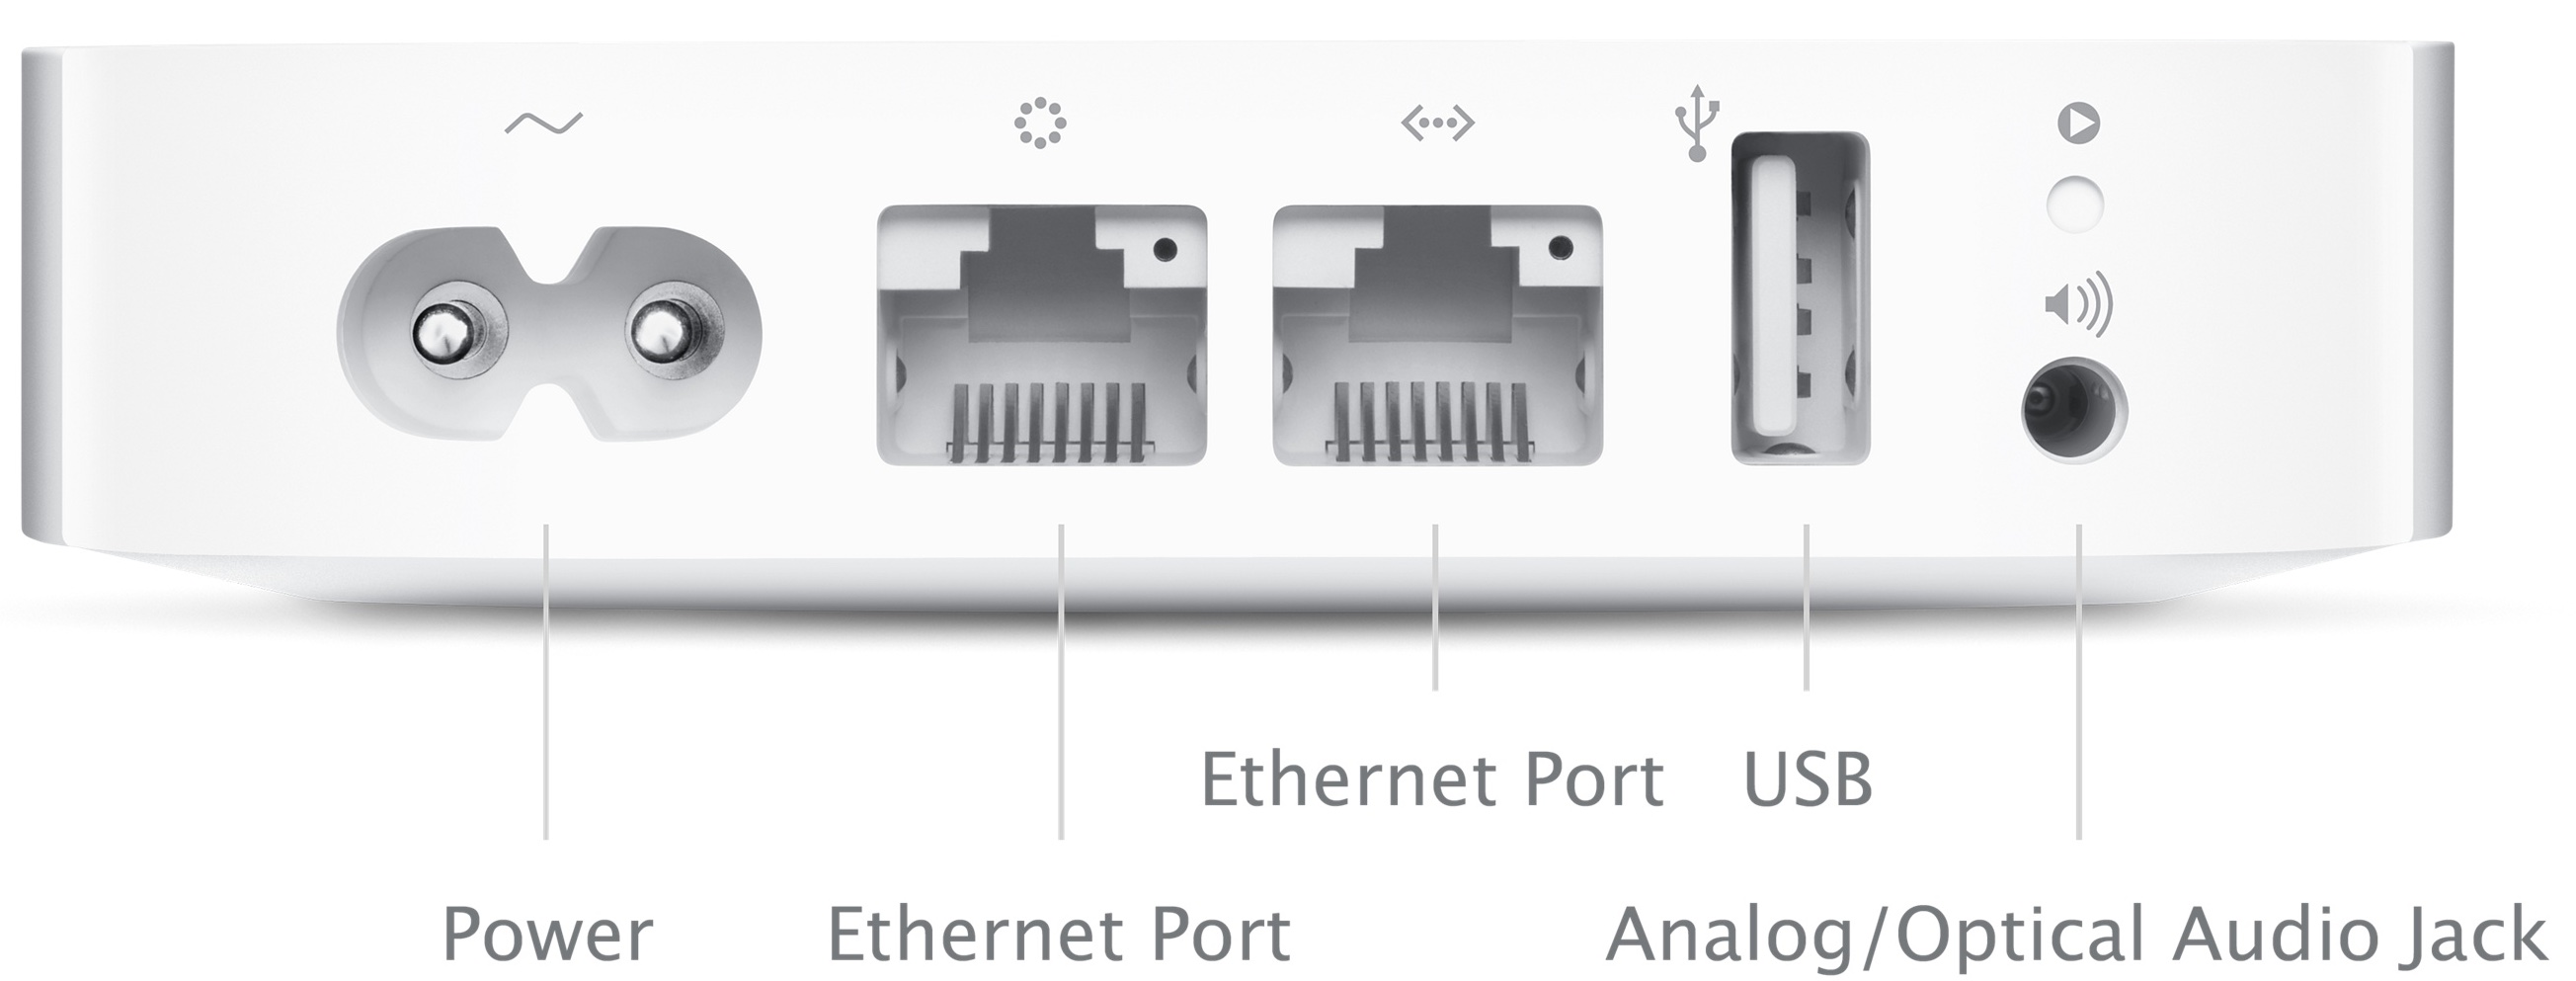 AirPort Express ports